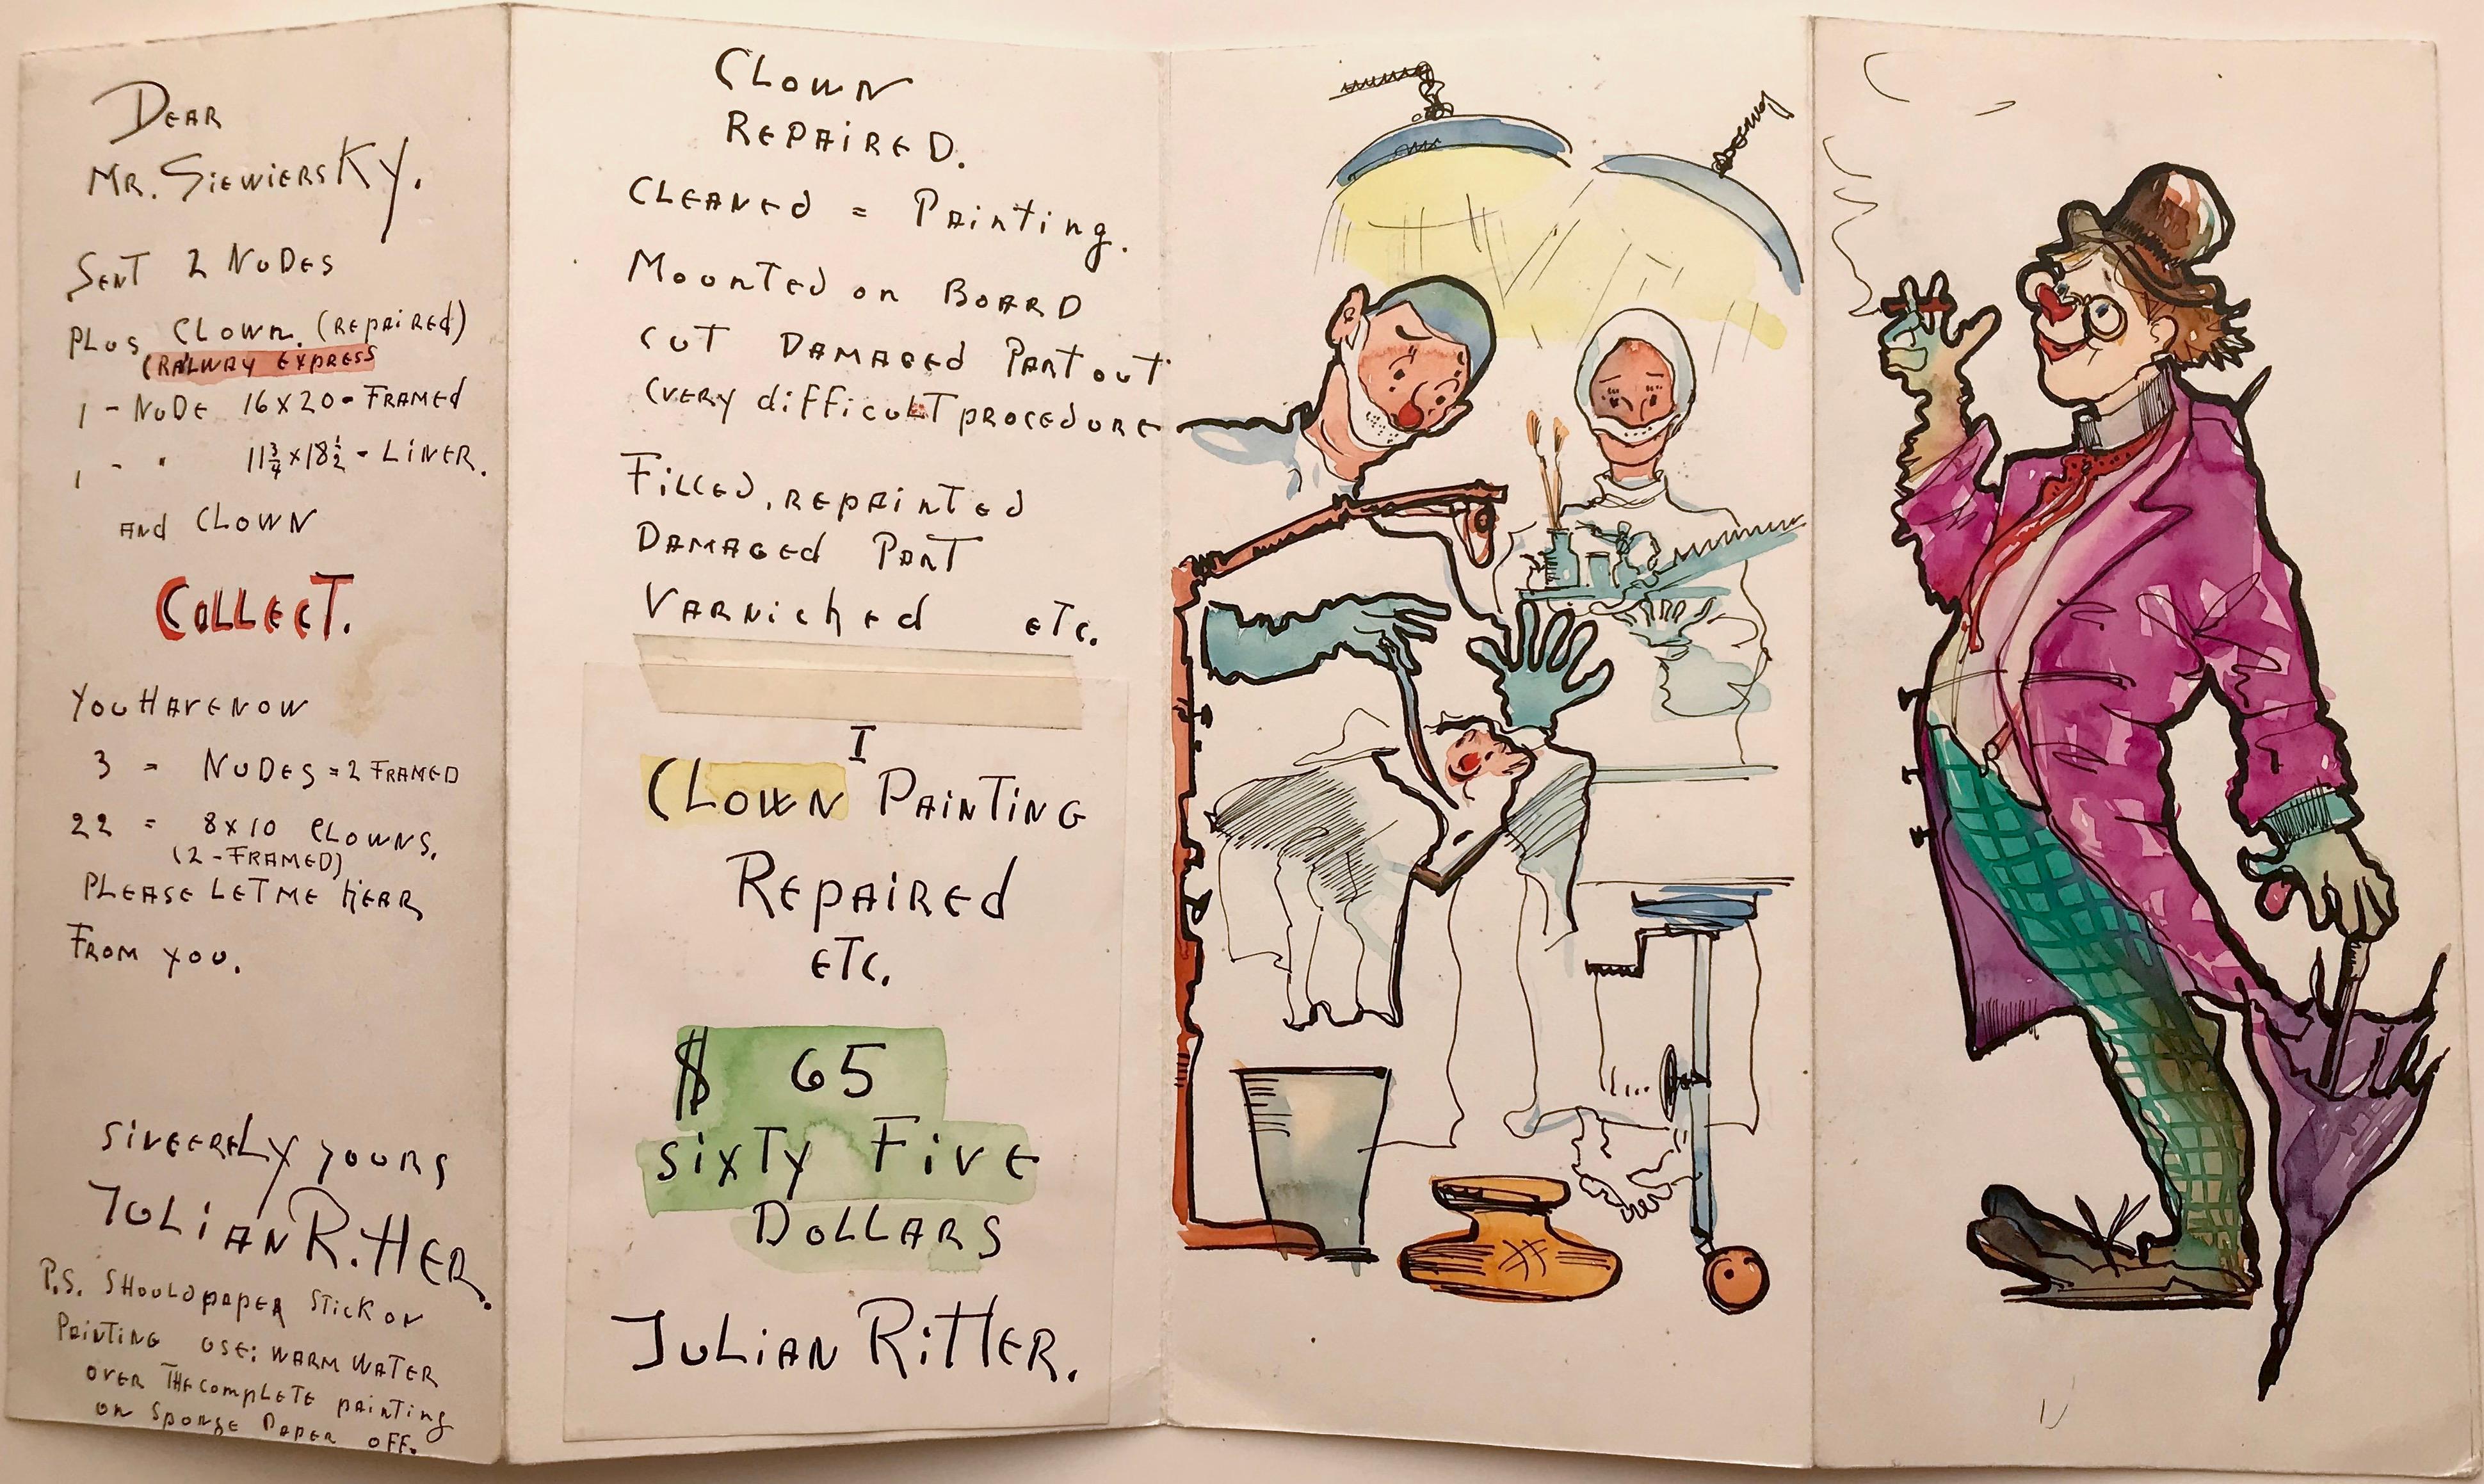 Full size: 16.5 x 9 in;

Although Ritter was best known for his oil paintings of nudes, clowns and portraits, he also worked in other media including pen-and-ink with watercolor, charcoal and Conté crayons and painted other subjects including